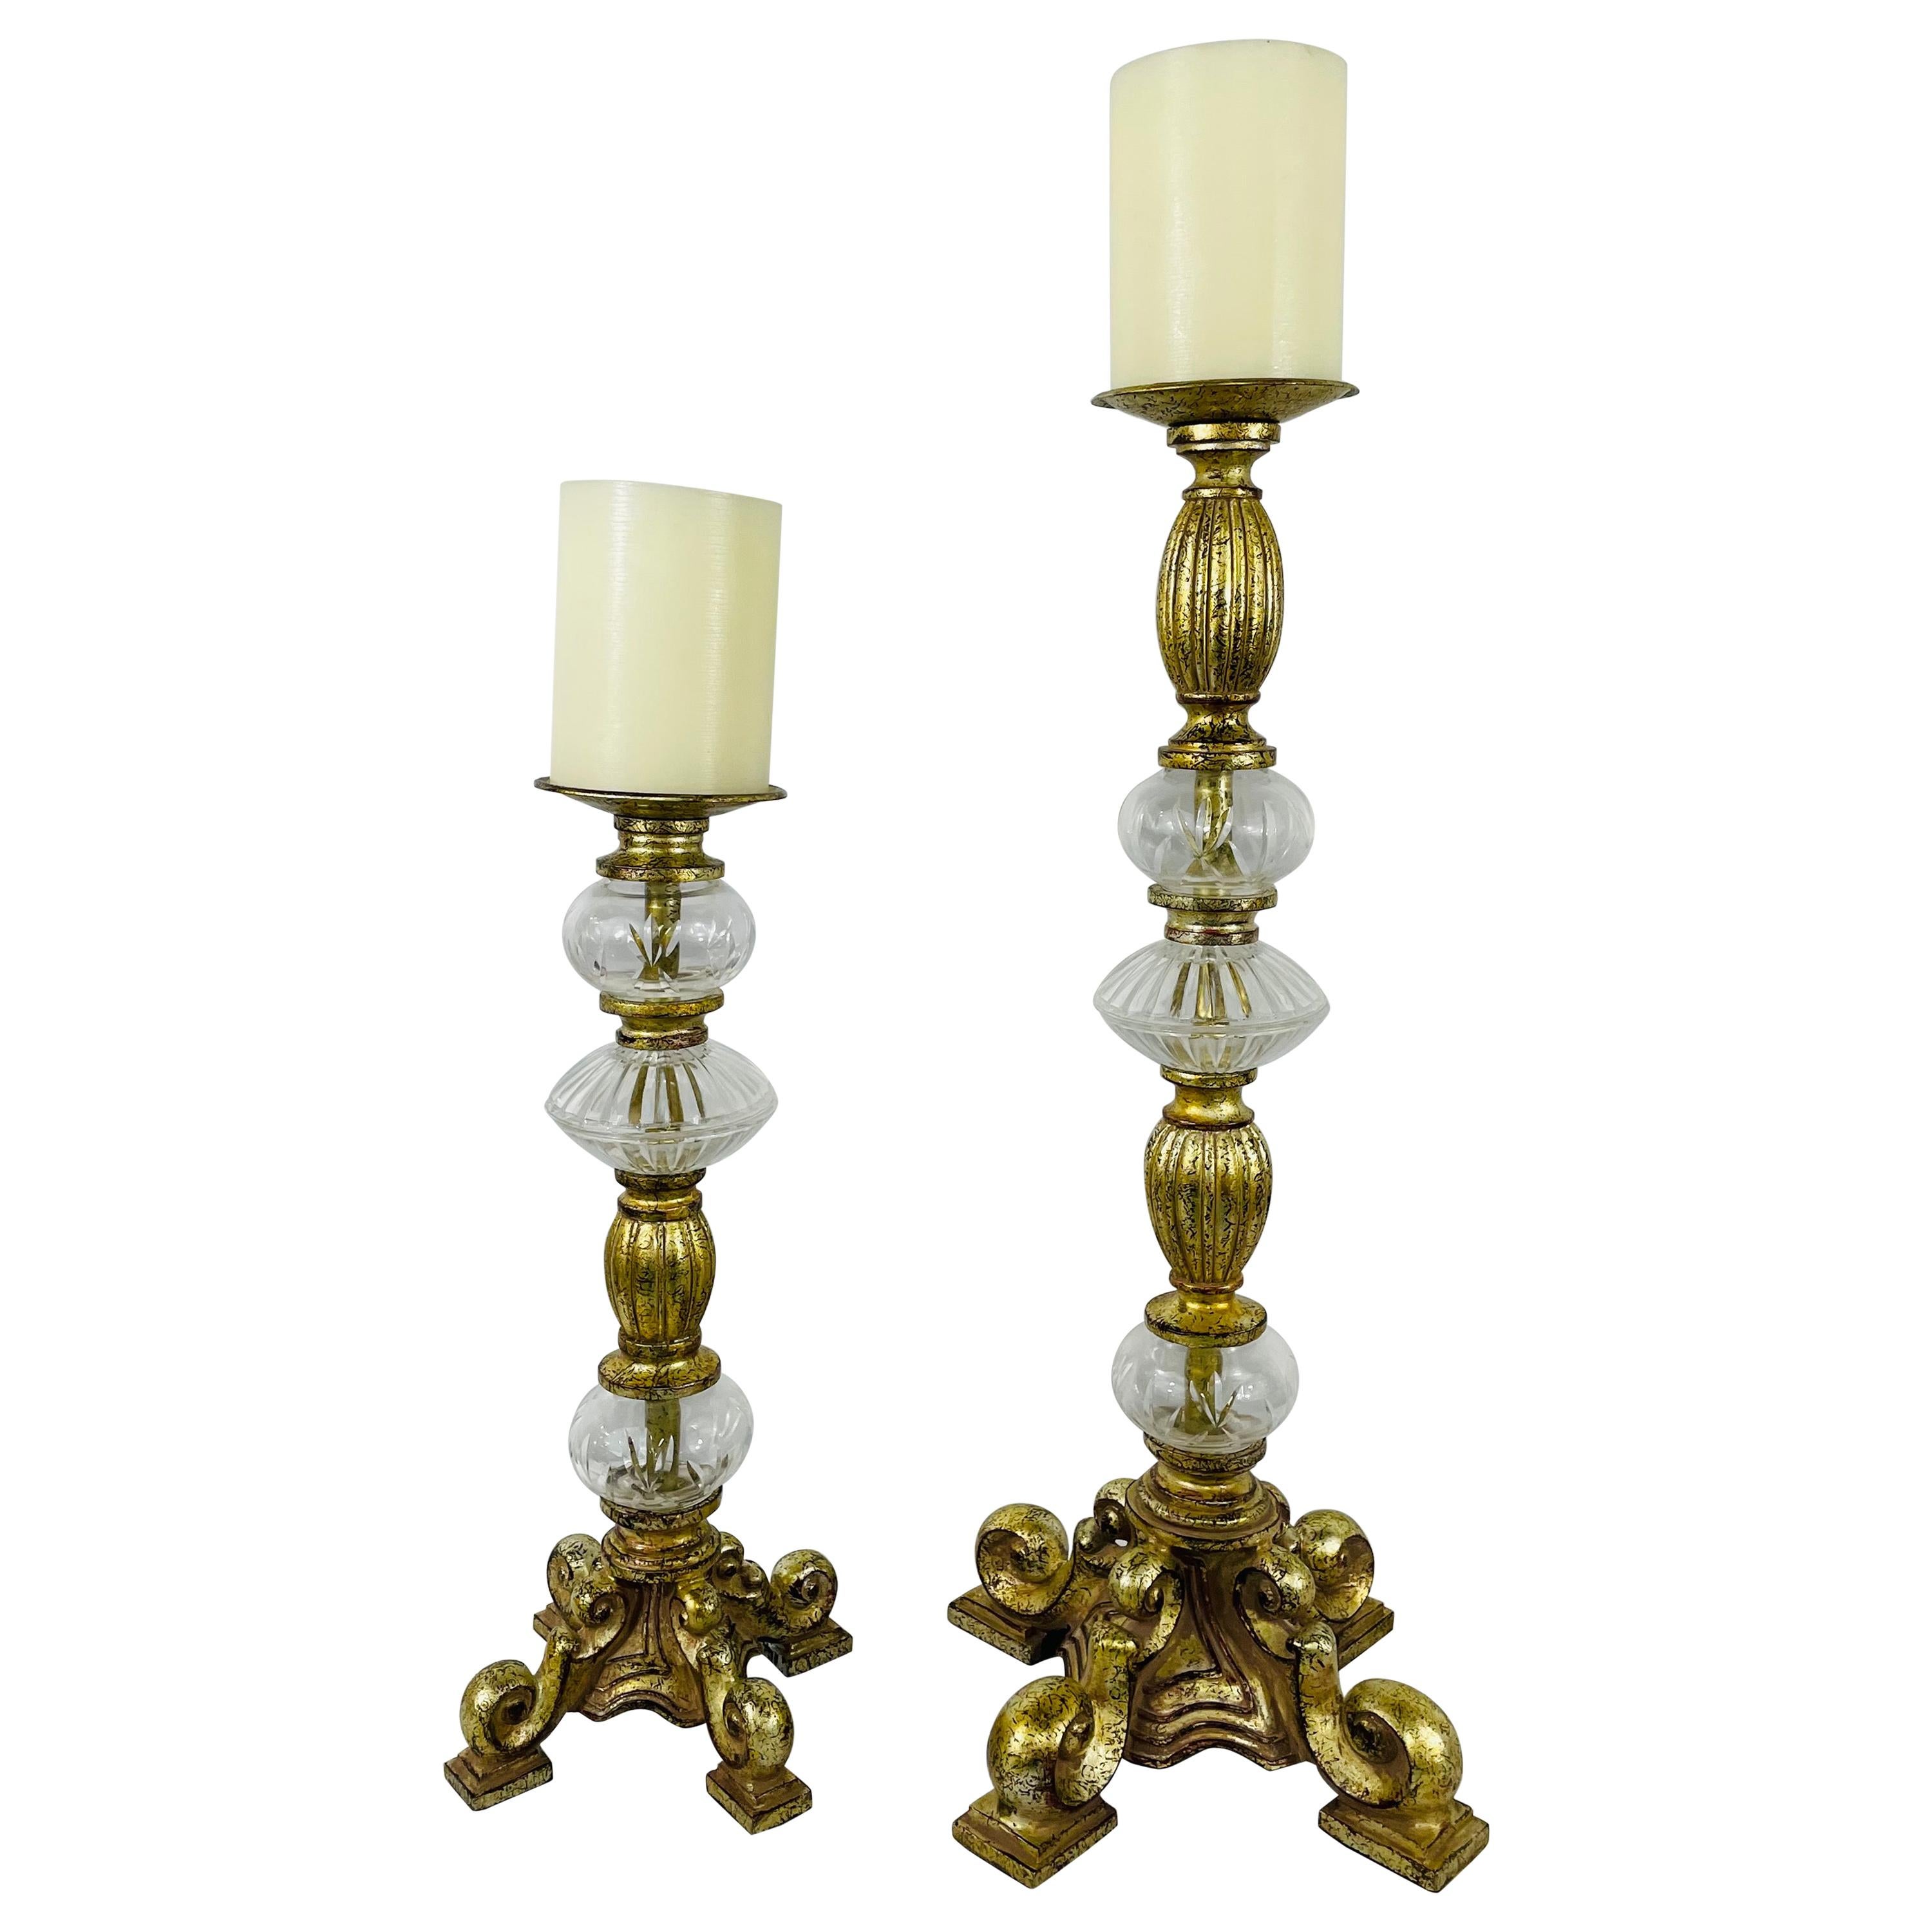 Italian Rococo Style Gilt Metal and Cut Glass Candle Holder, a Pair For Sale